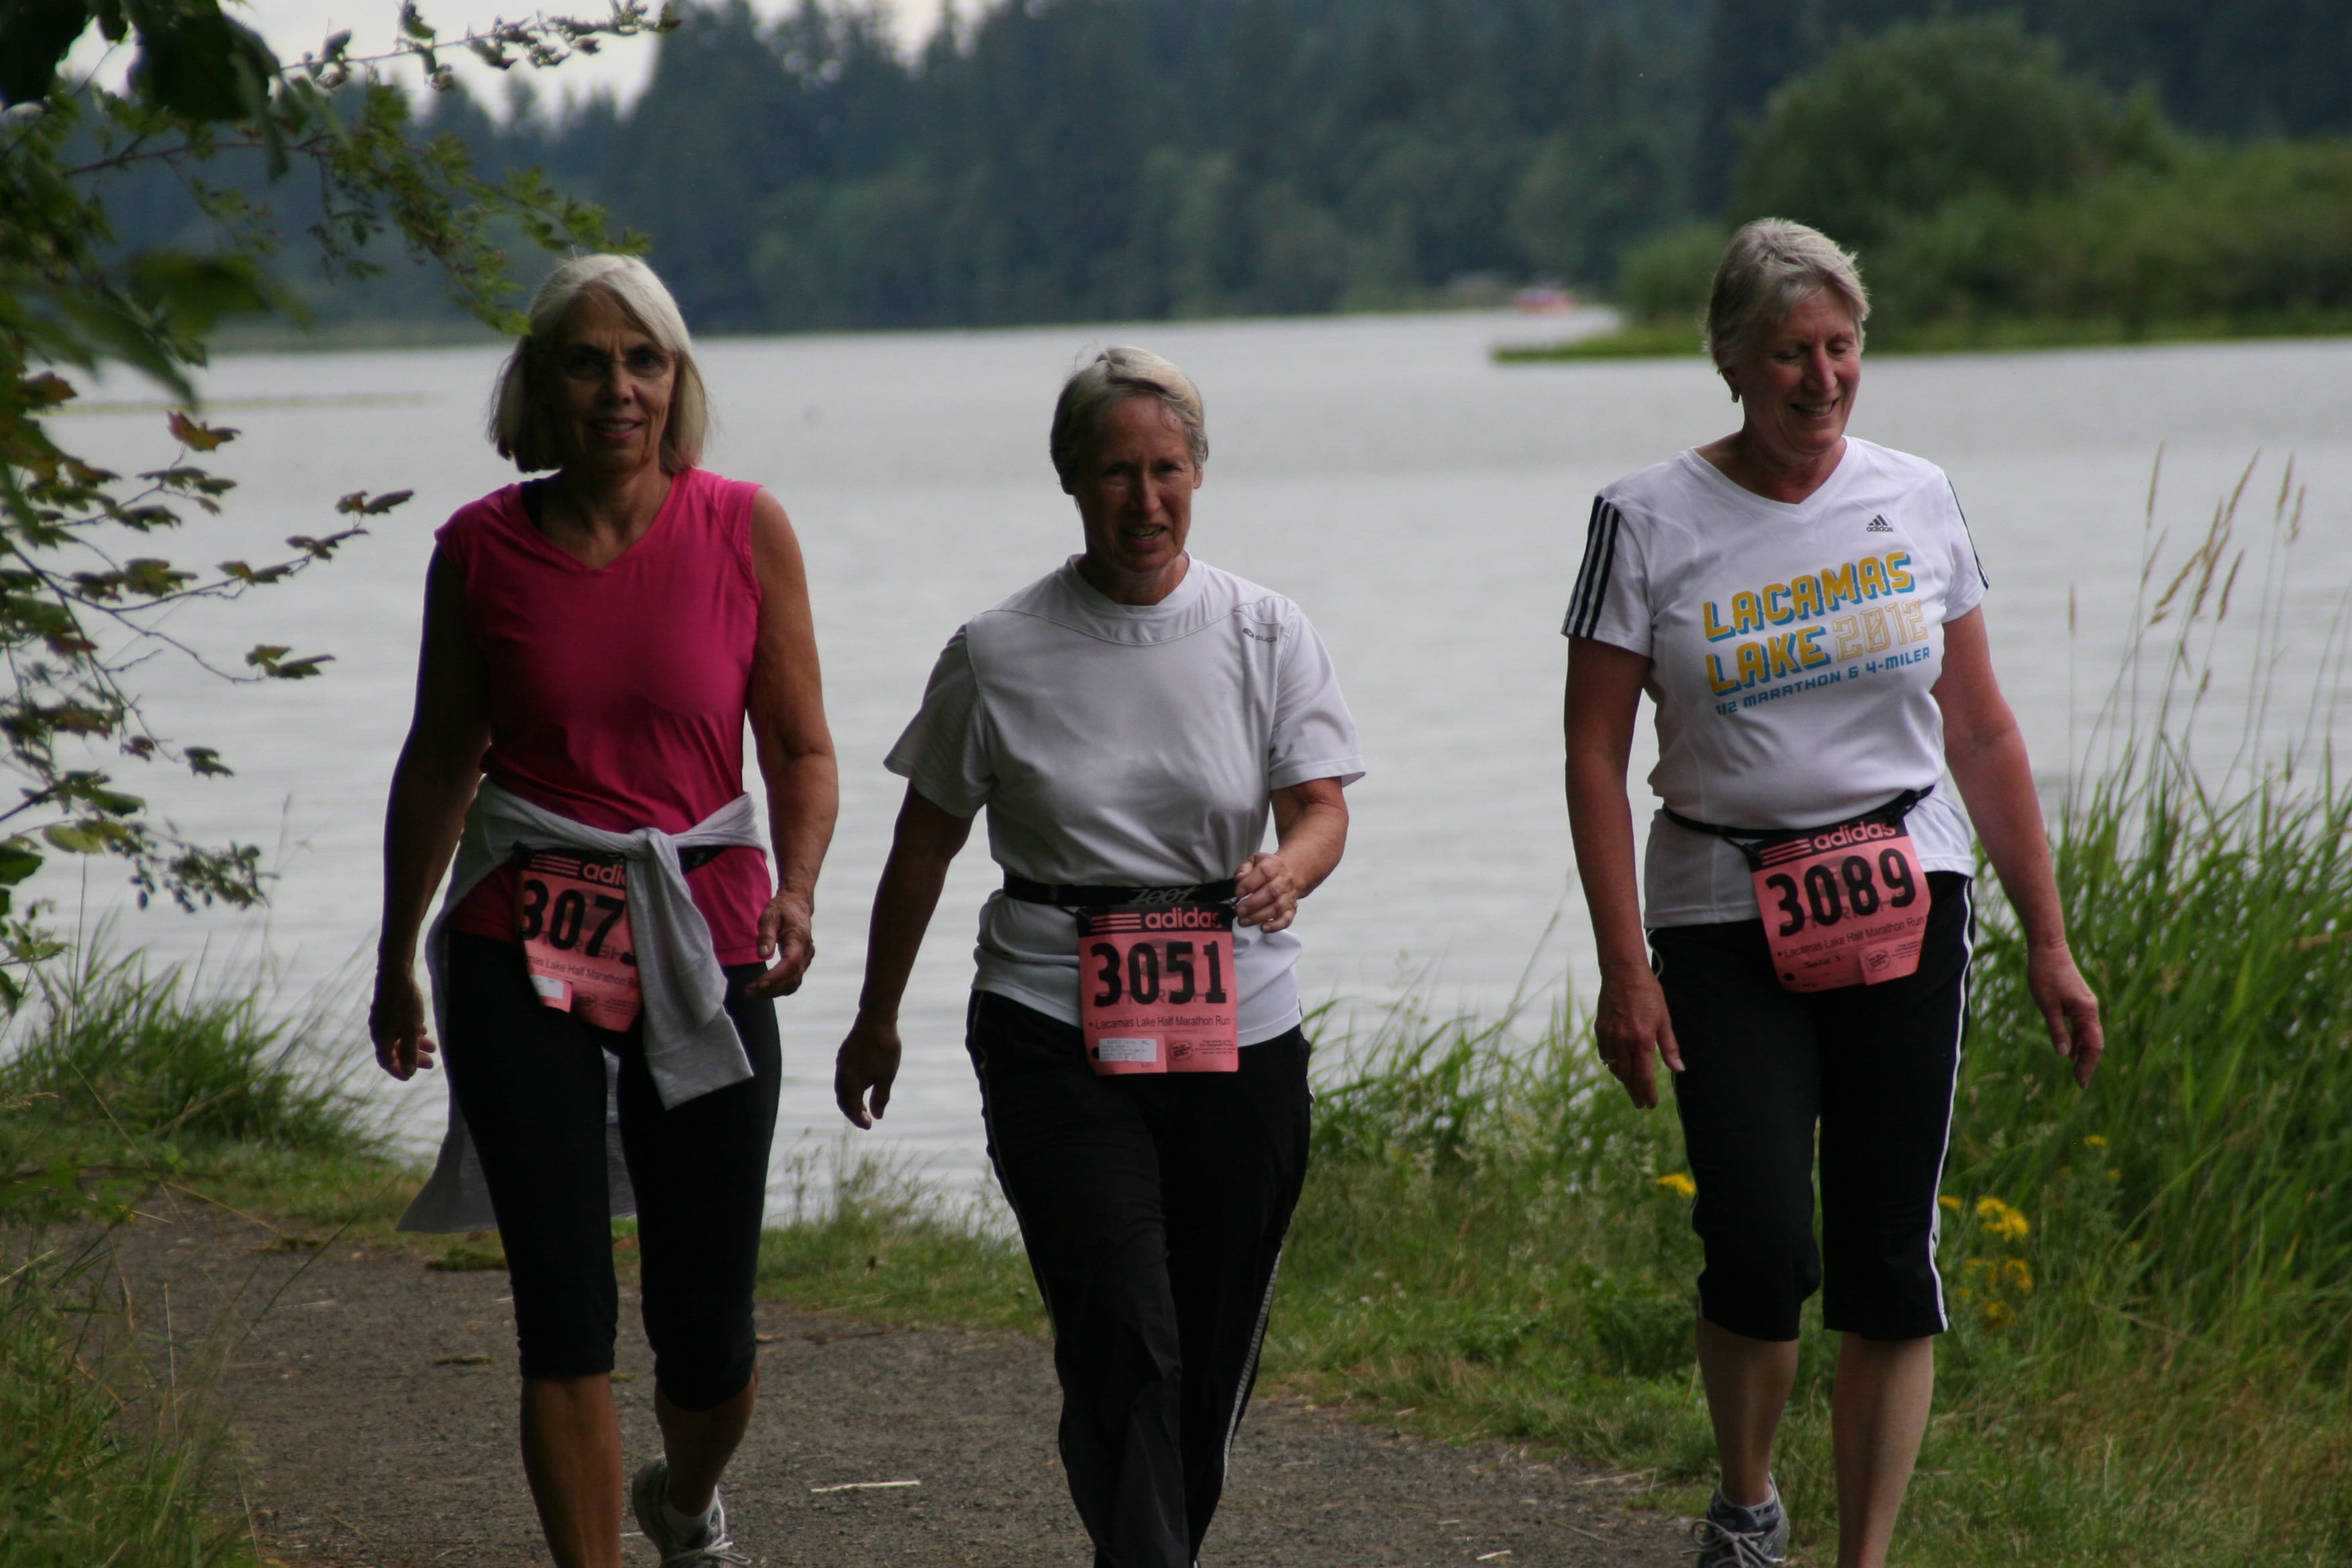 More than 1,000 runners and walkers participated in the 2012 Fit Right Northwest Half Marathon and 4-miler around Lacamas and Round lakes Sunday, in Camas.